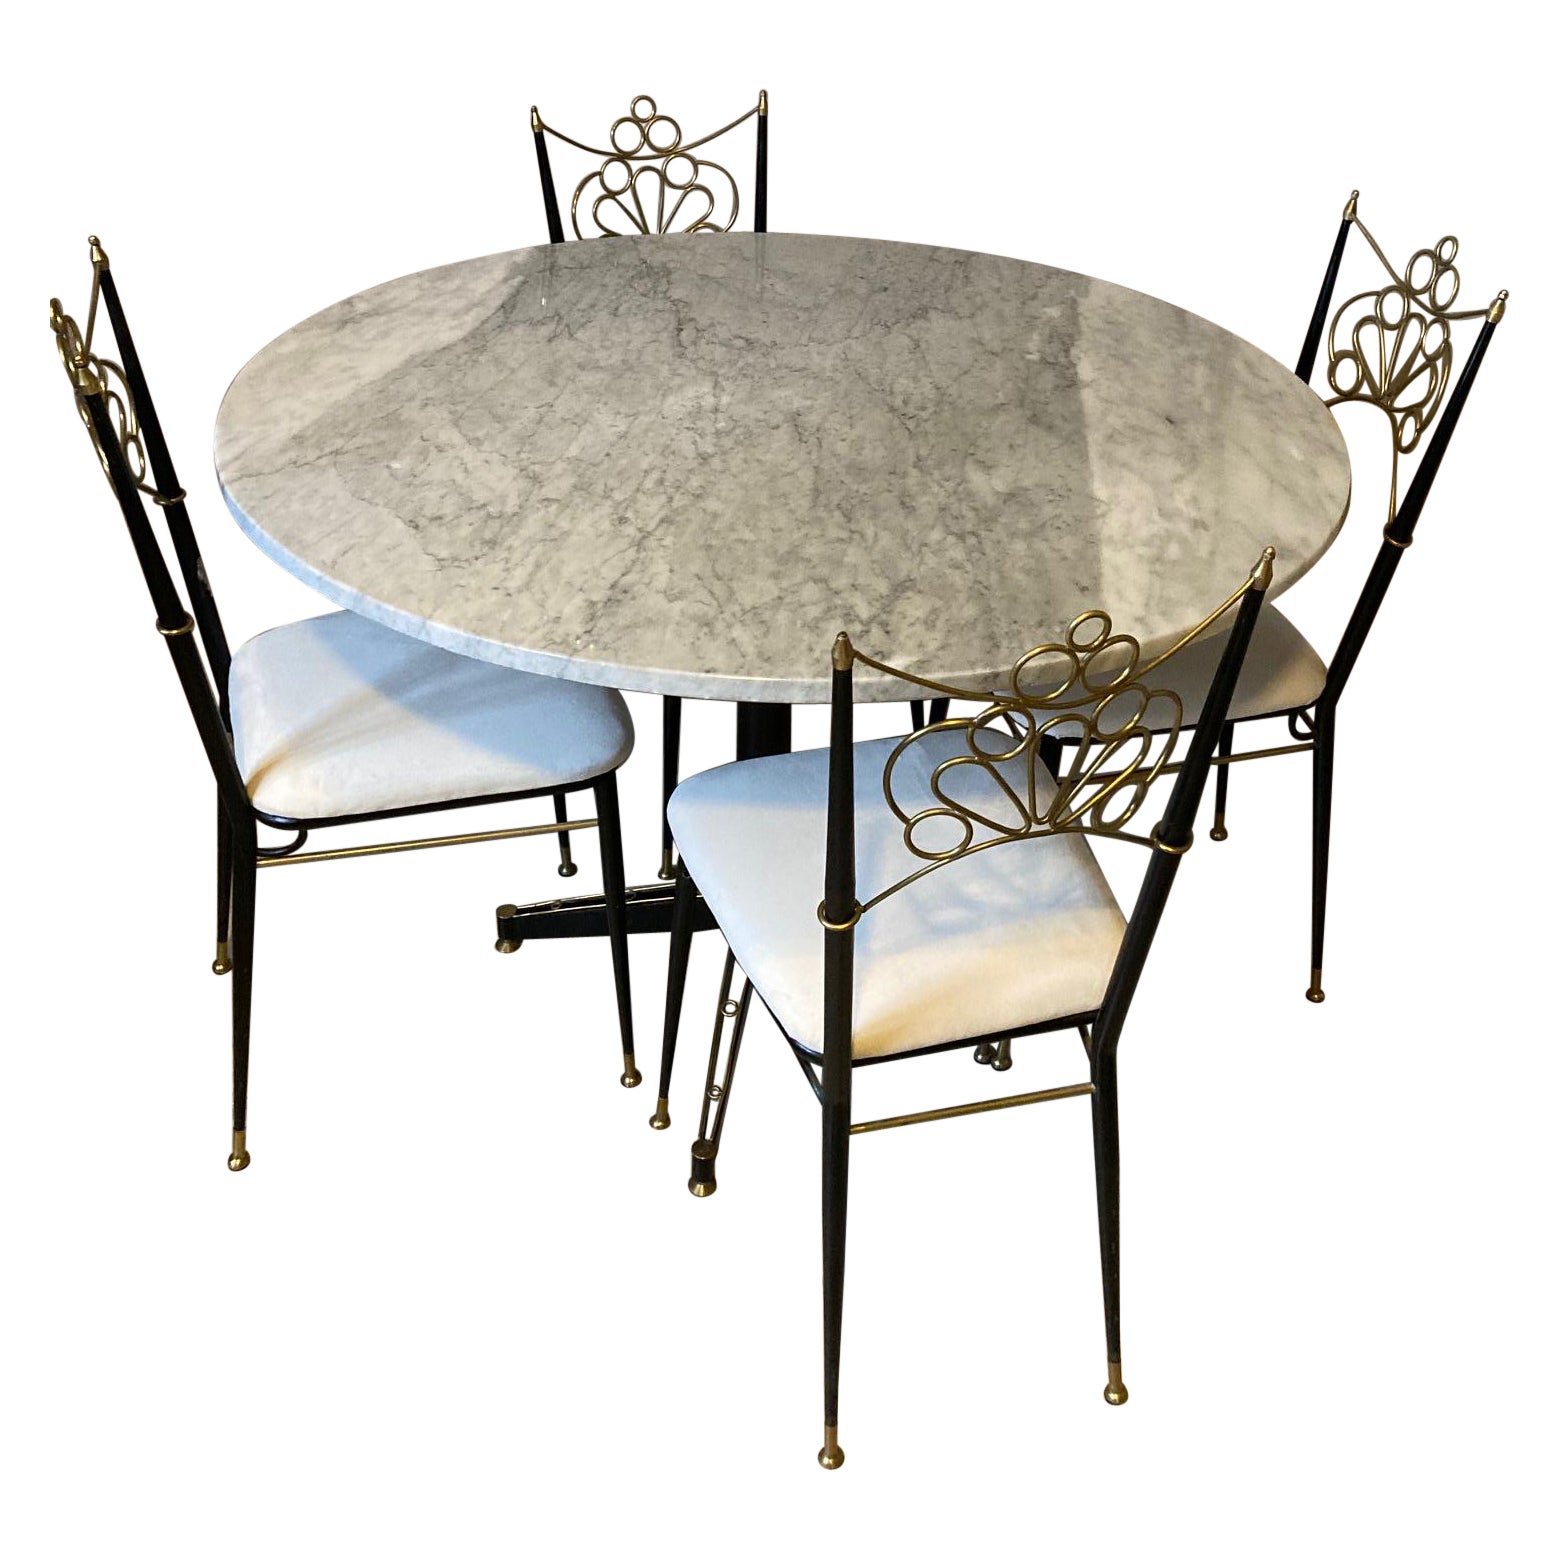 20th Century Marble, Metal and Brass Rounded Table with 4 Chairs, 1950s For Sale